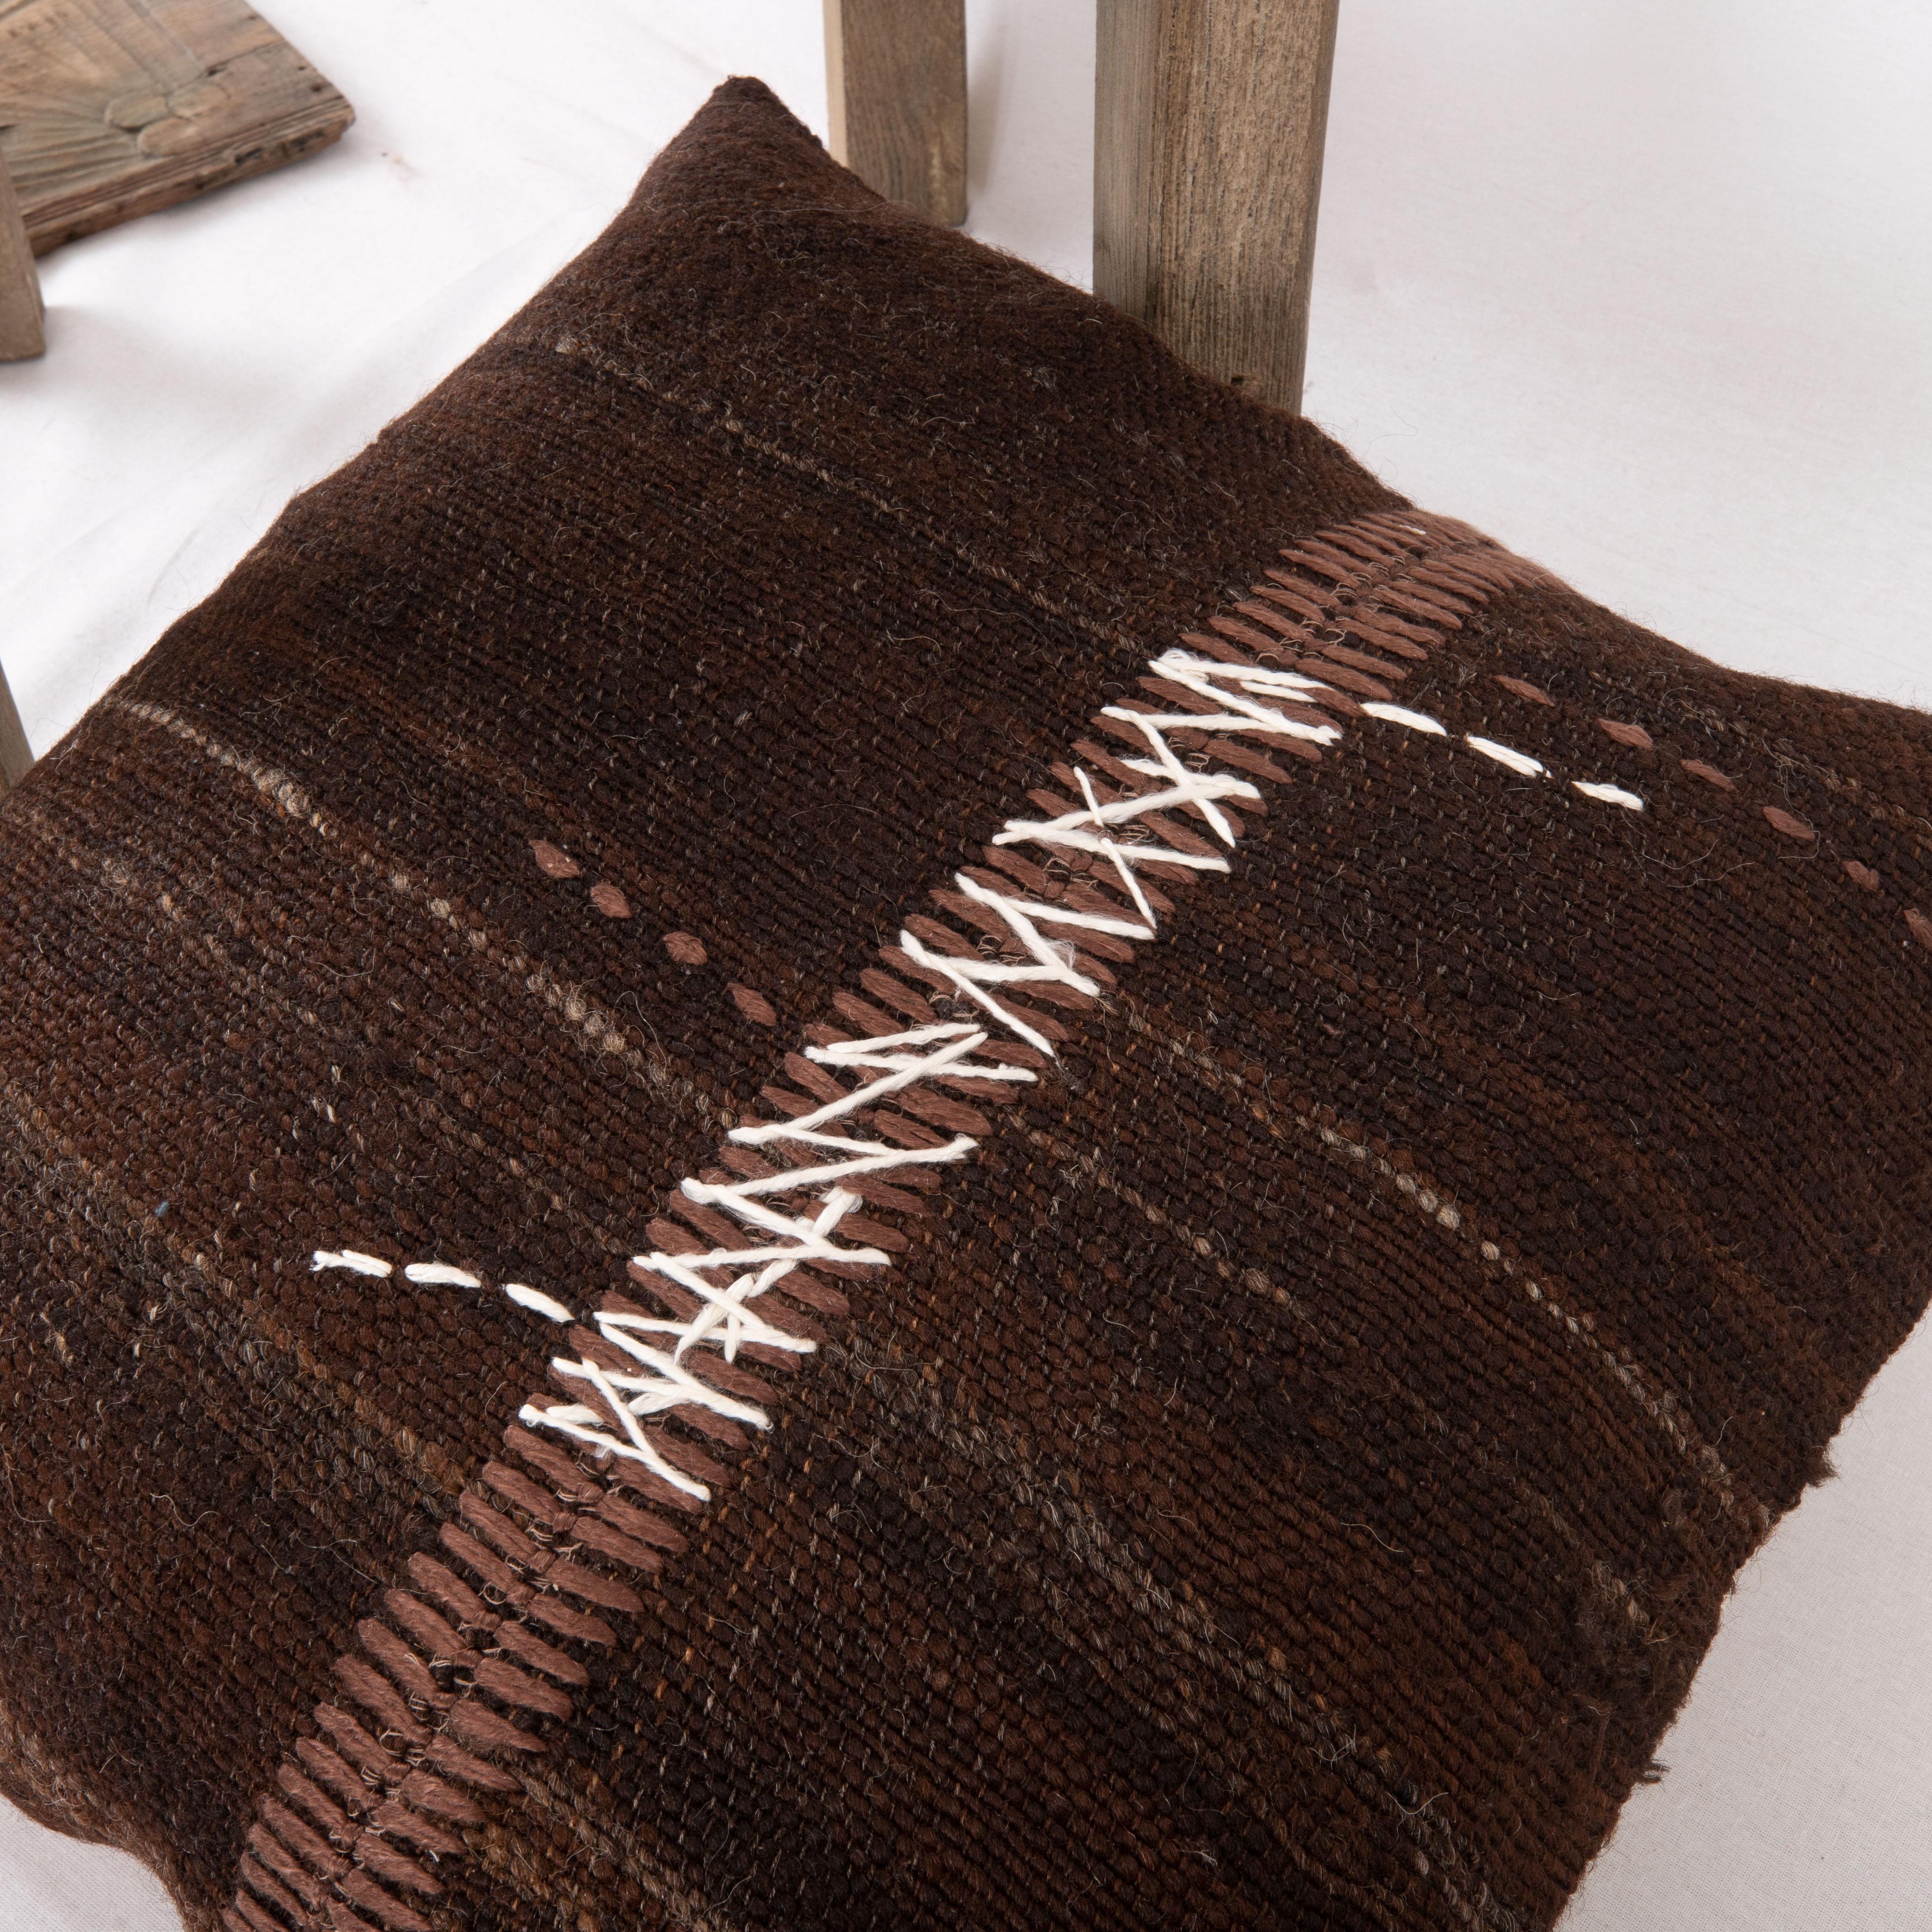 Hand-Woven Rustic Pillow Case Made from a Vintage Un-Dyed Wool Coverlet, Mid 20th C For Sale